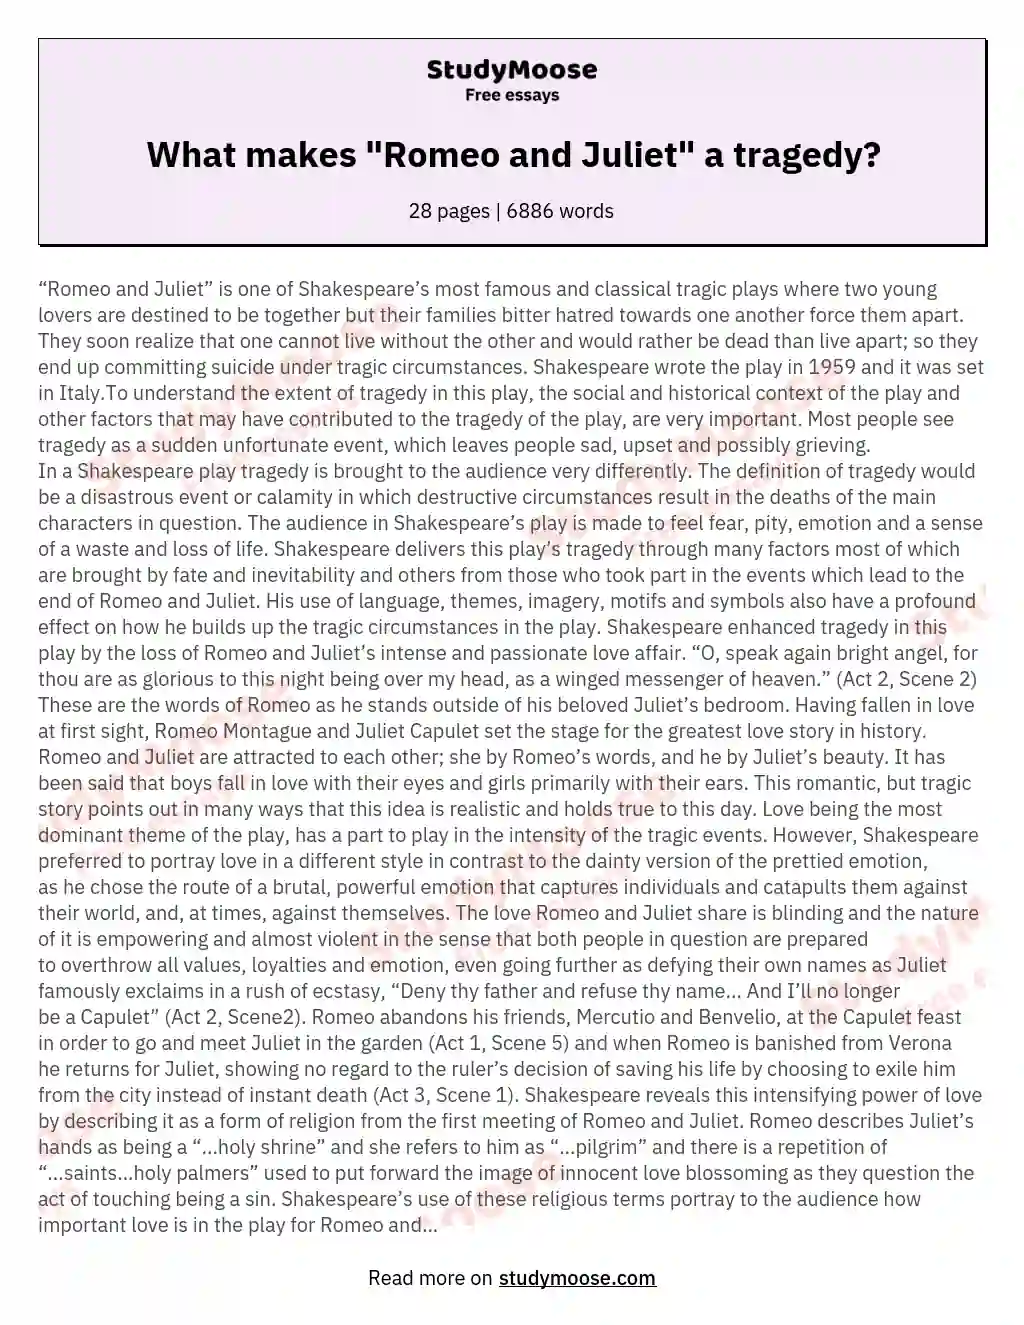 What makes "Romeo and Juliet" a tragedy? essay